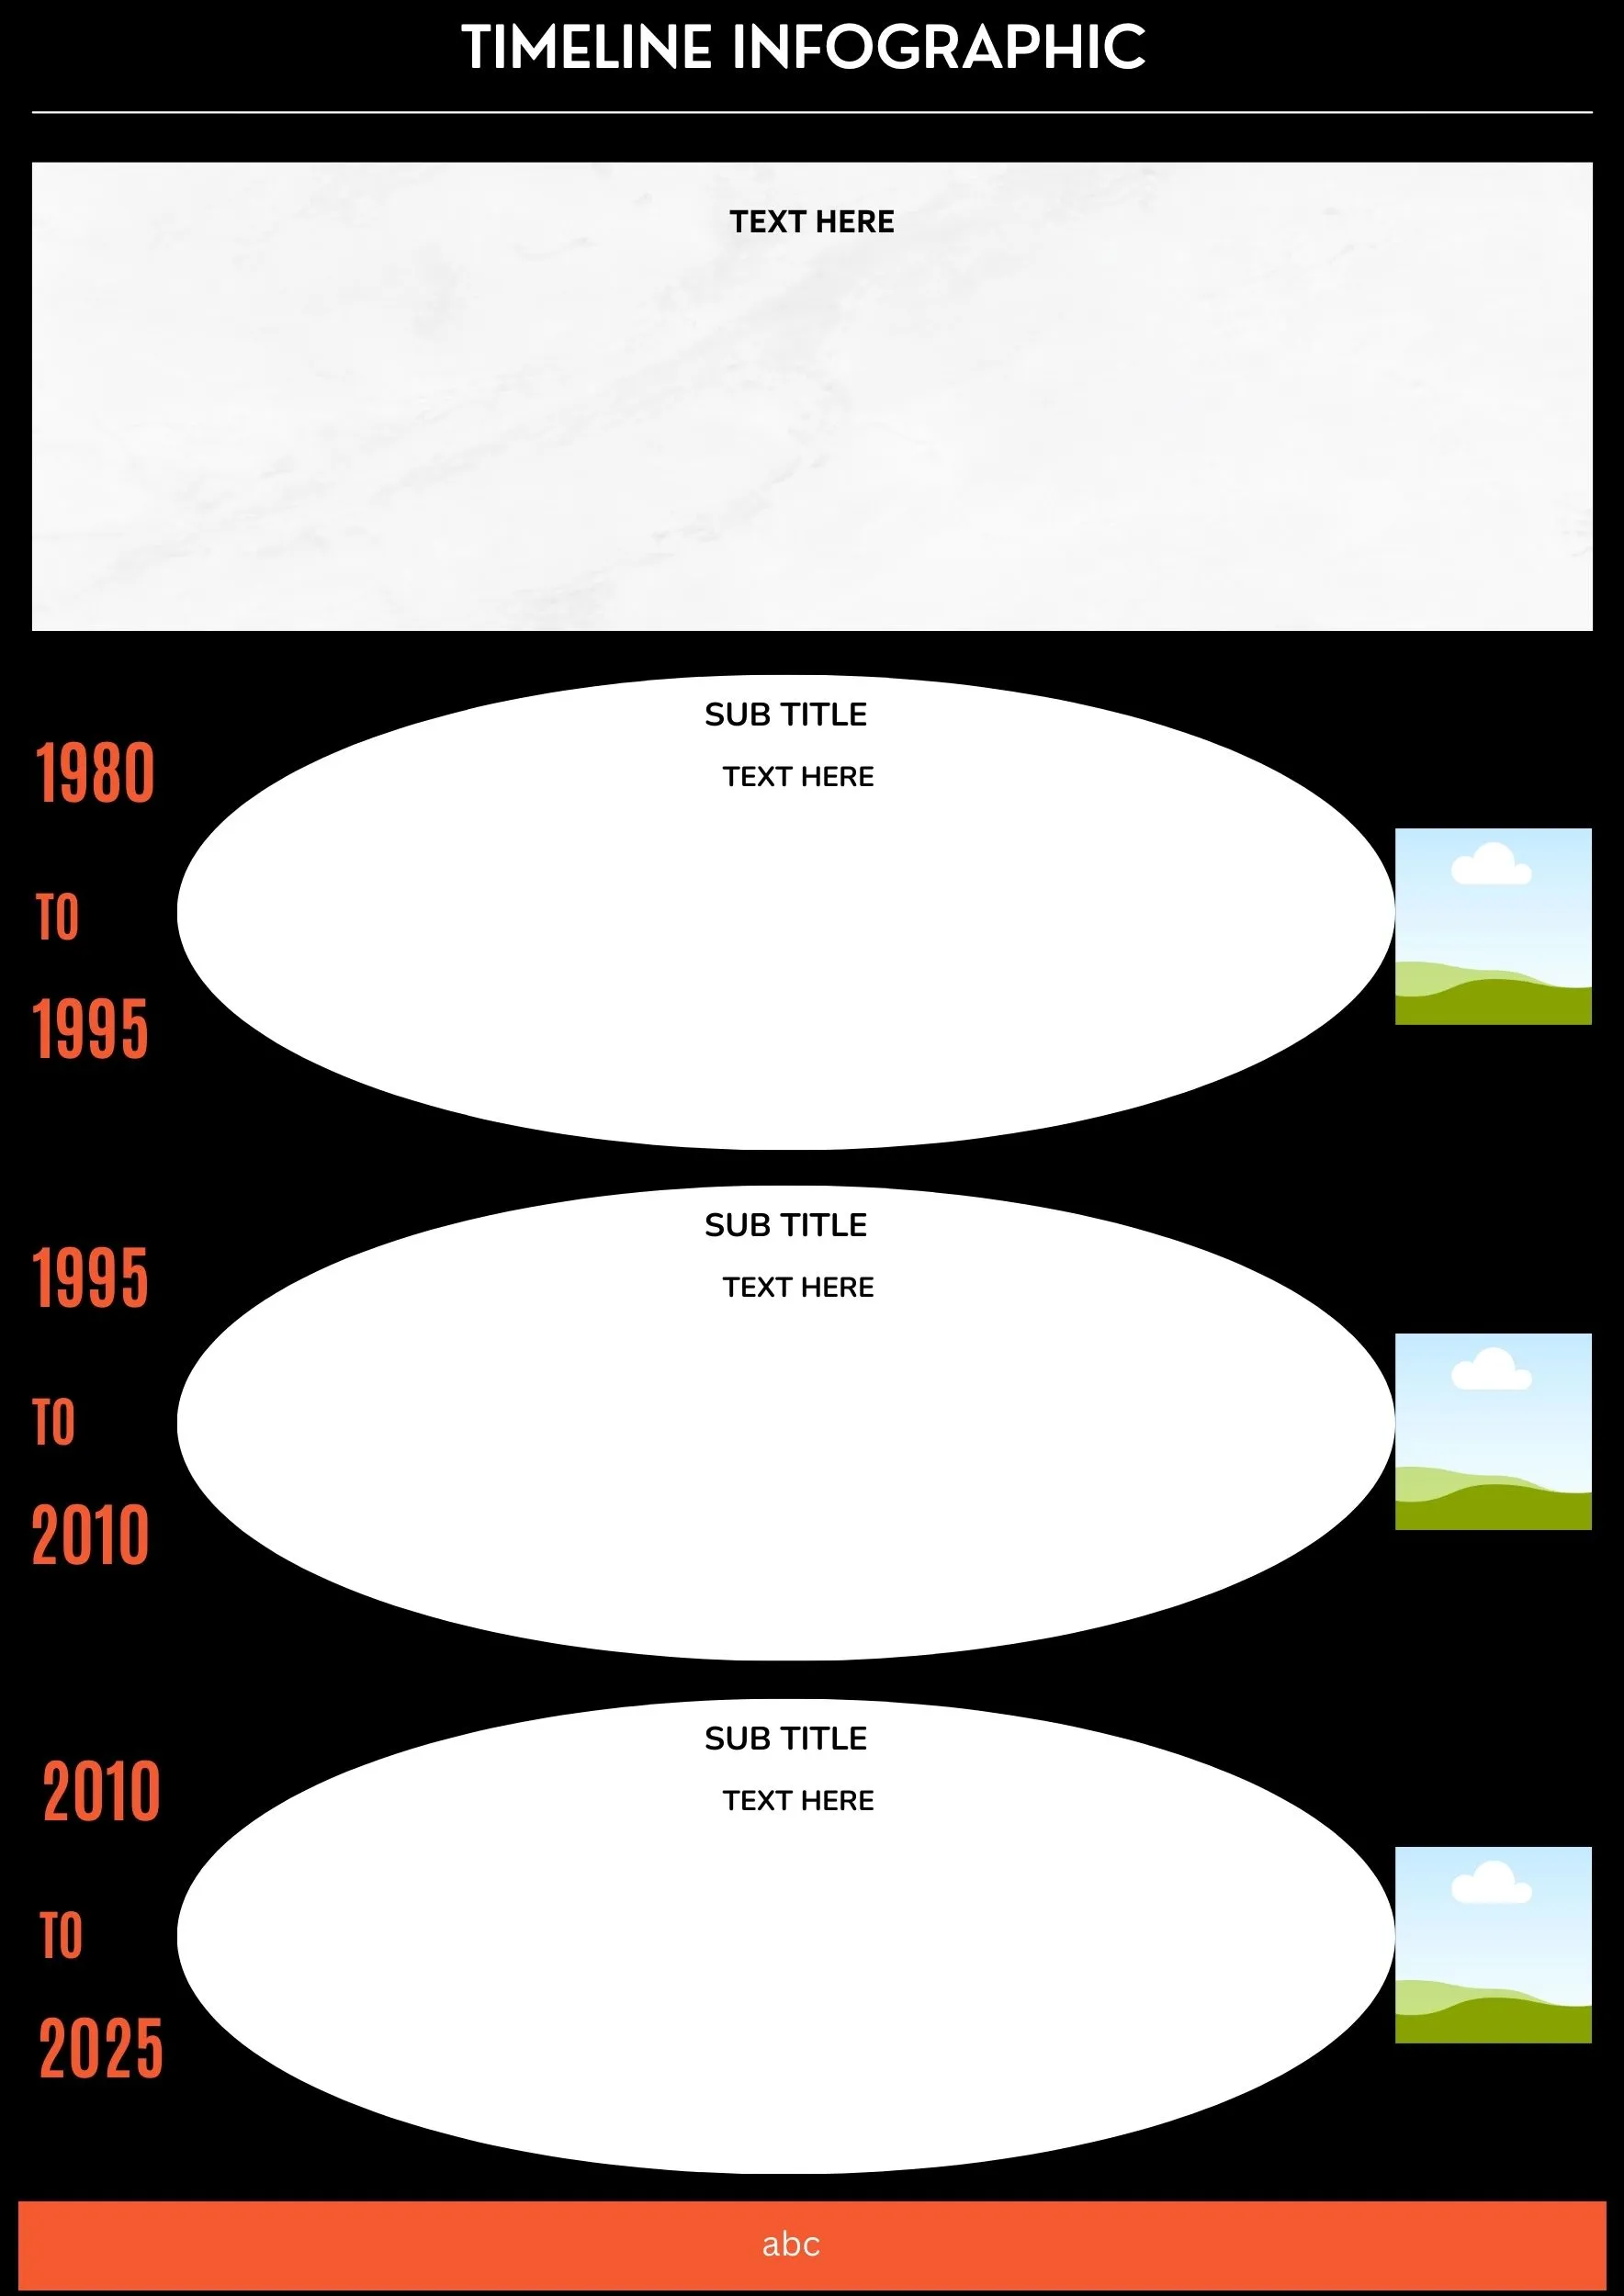 timeline infographic template all types of infographic templates | Explain timeline infographic